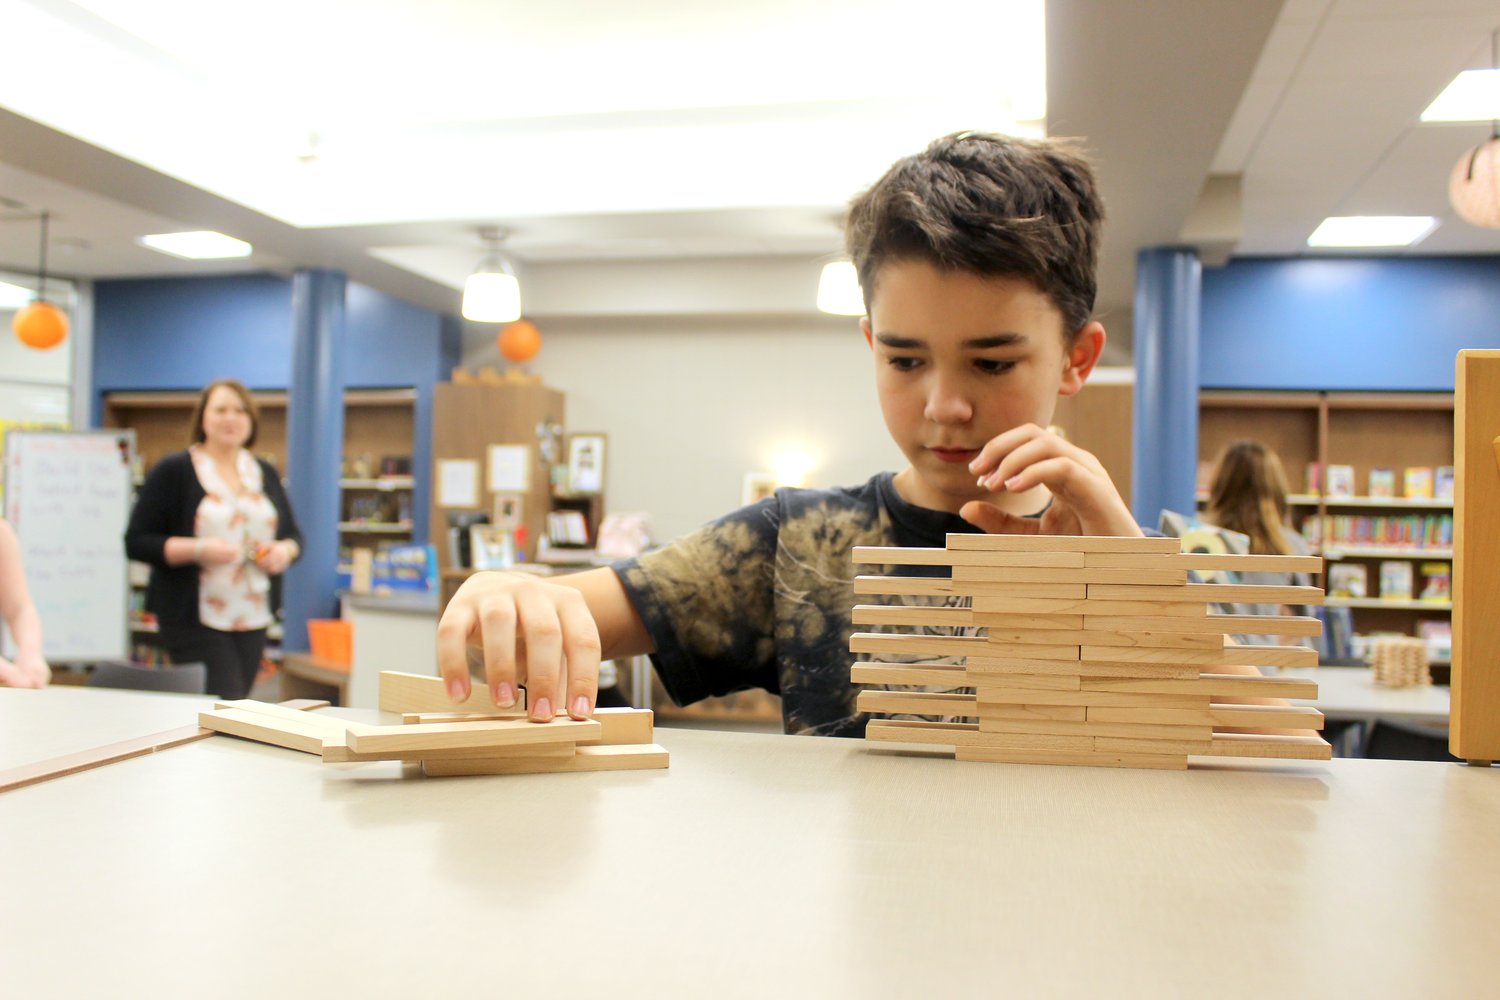 Connor Laws, 10, begins building a Keva-plank tower Thursday at Pleasant Hill. Laws nearly set the day's record with a tower measuring more than 30 inches before its eventual collapse.